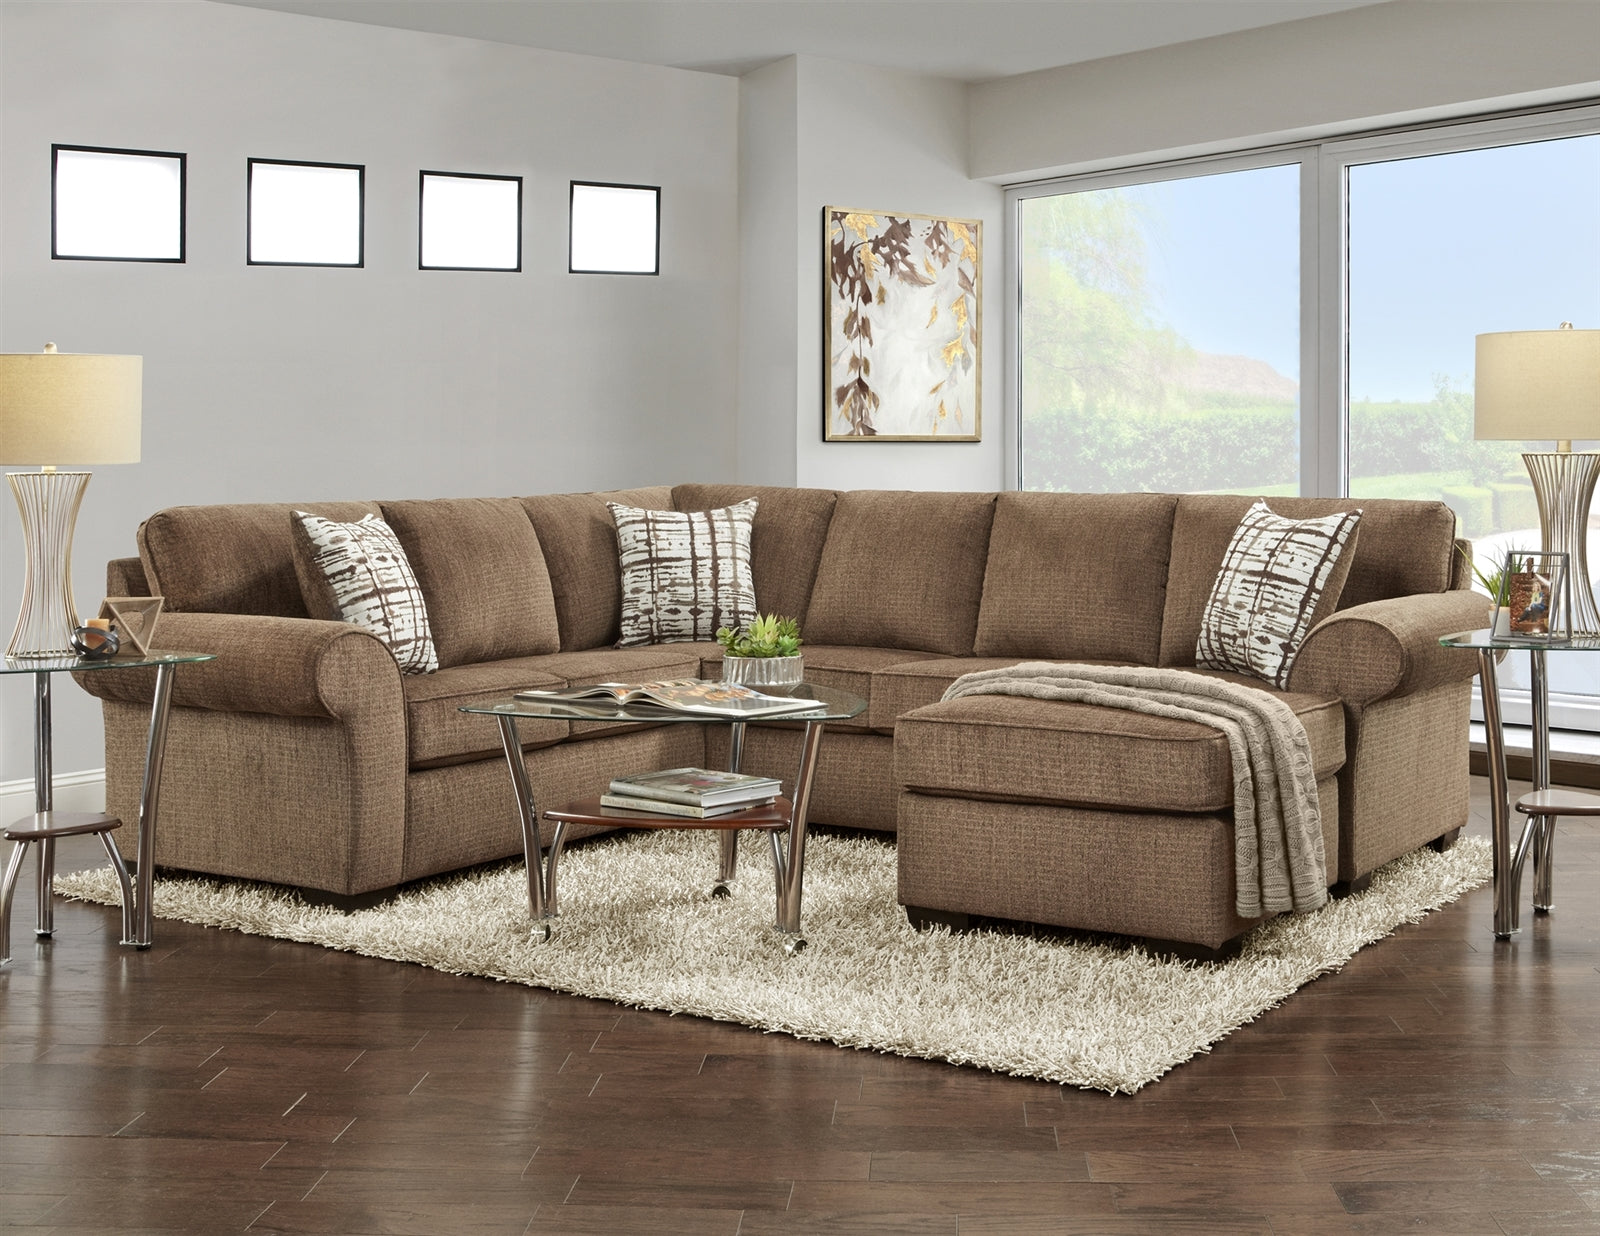 Where to Find Affordable Furniture for Your New Home 